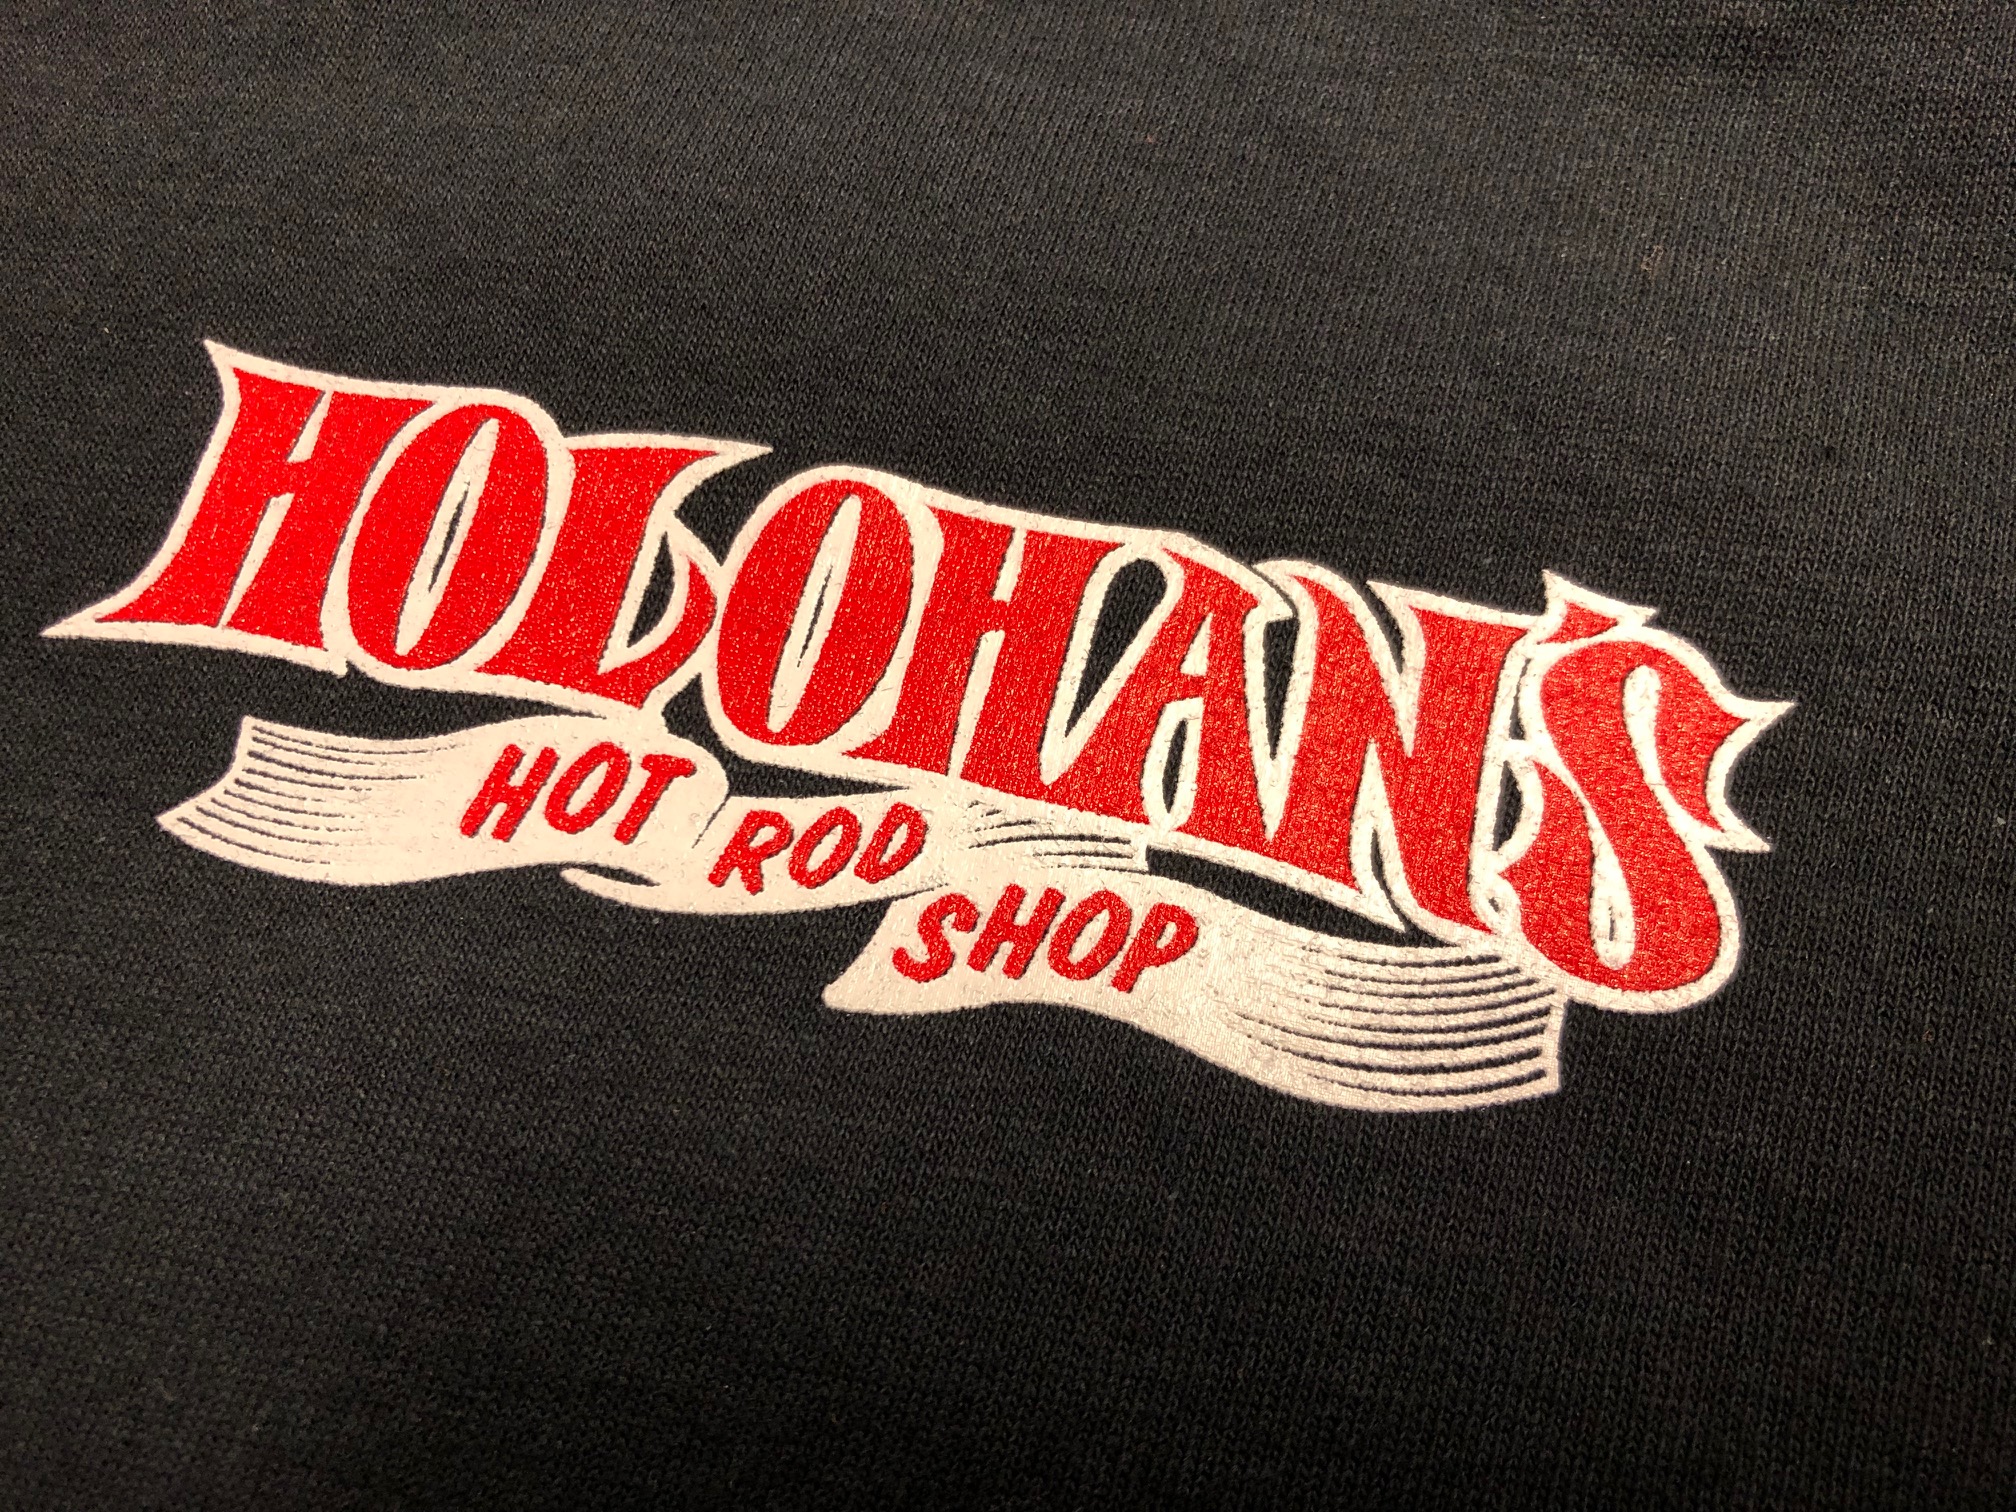 Hot Rod Tee Shirts - HHRS Designs - Black Long Sleeve - In Stock